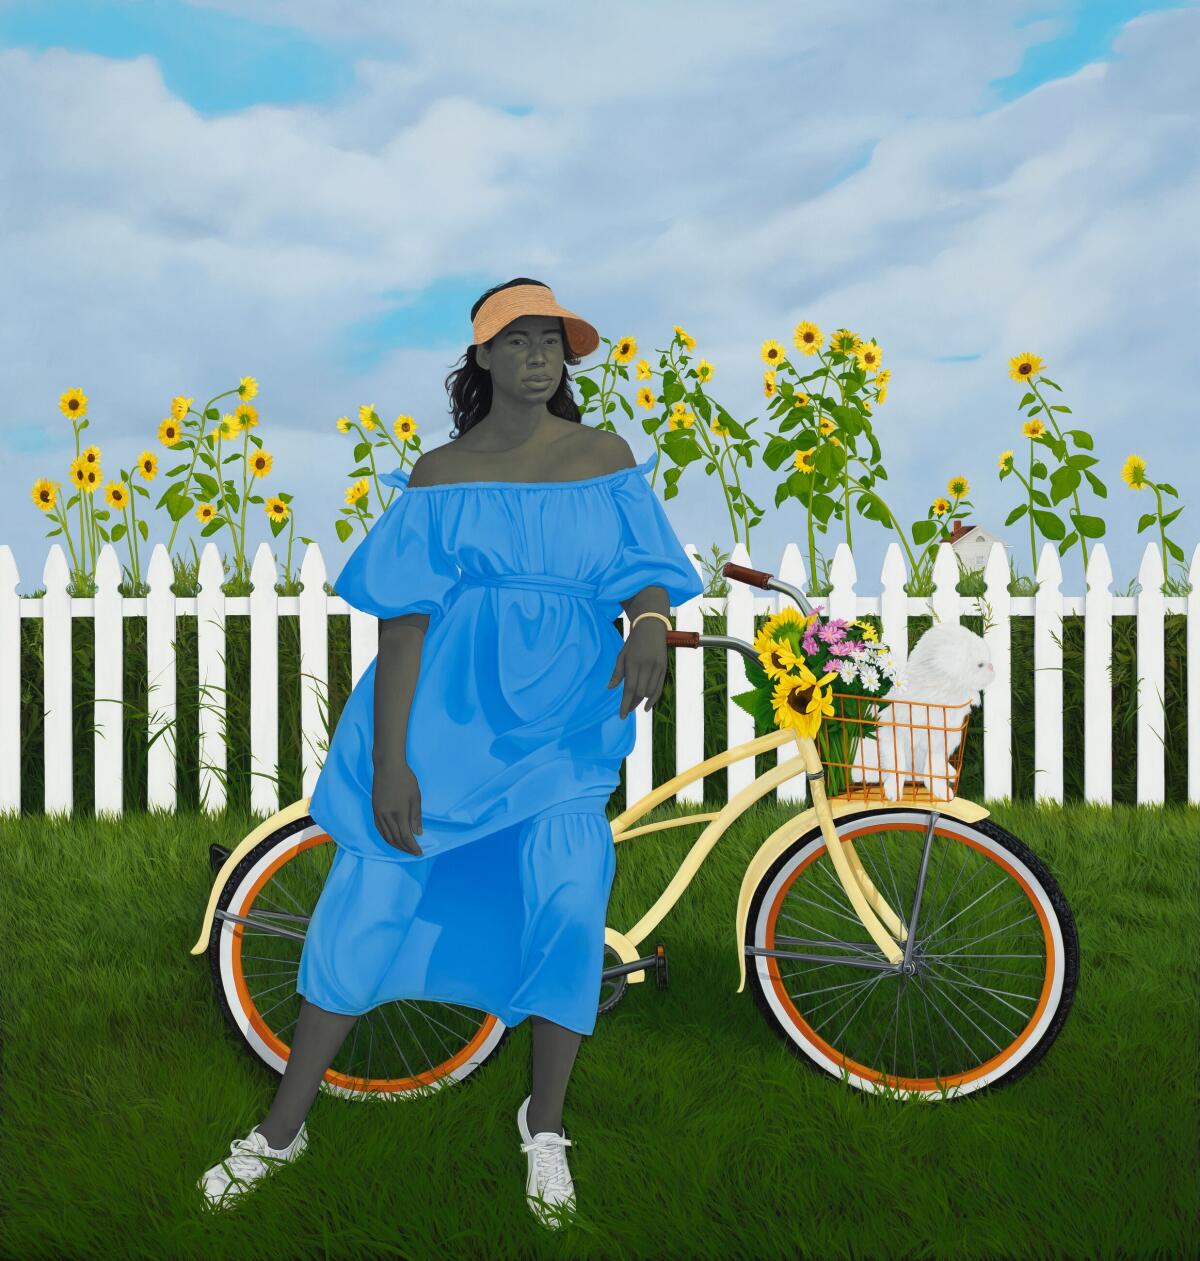 Painting of a woman in a blue dress leaning against a yellow bicycle.